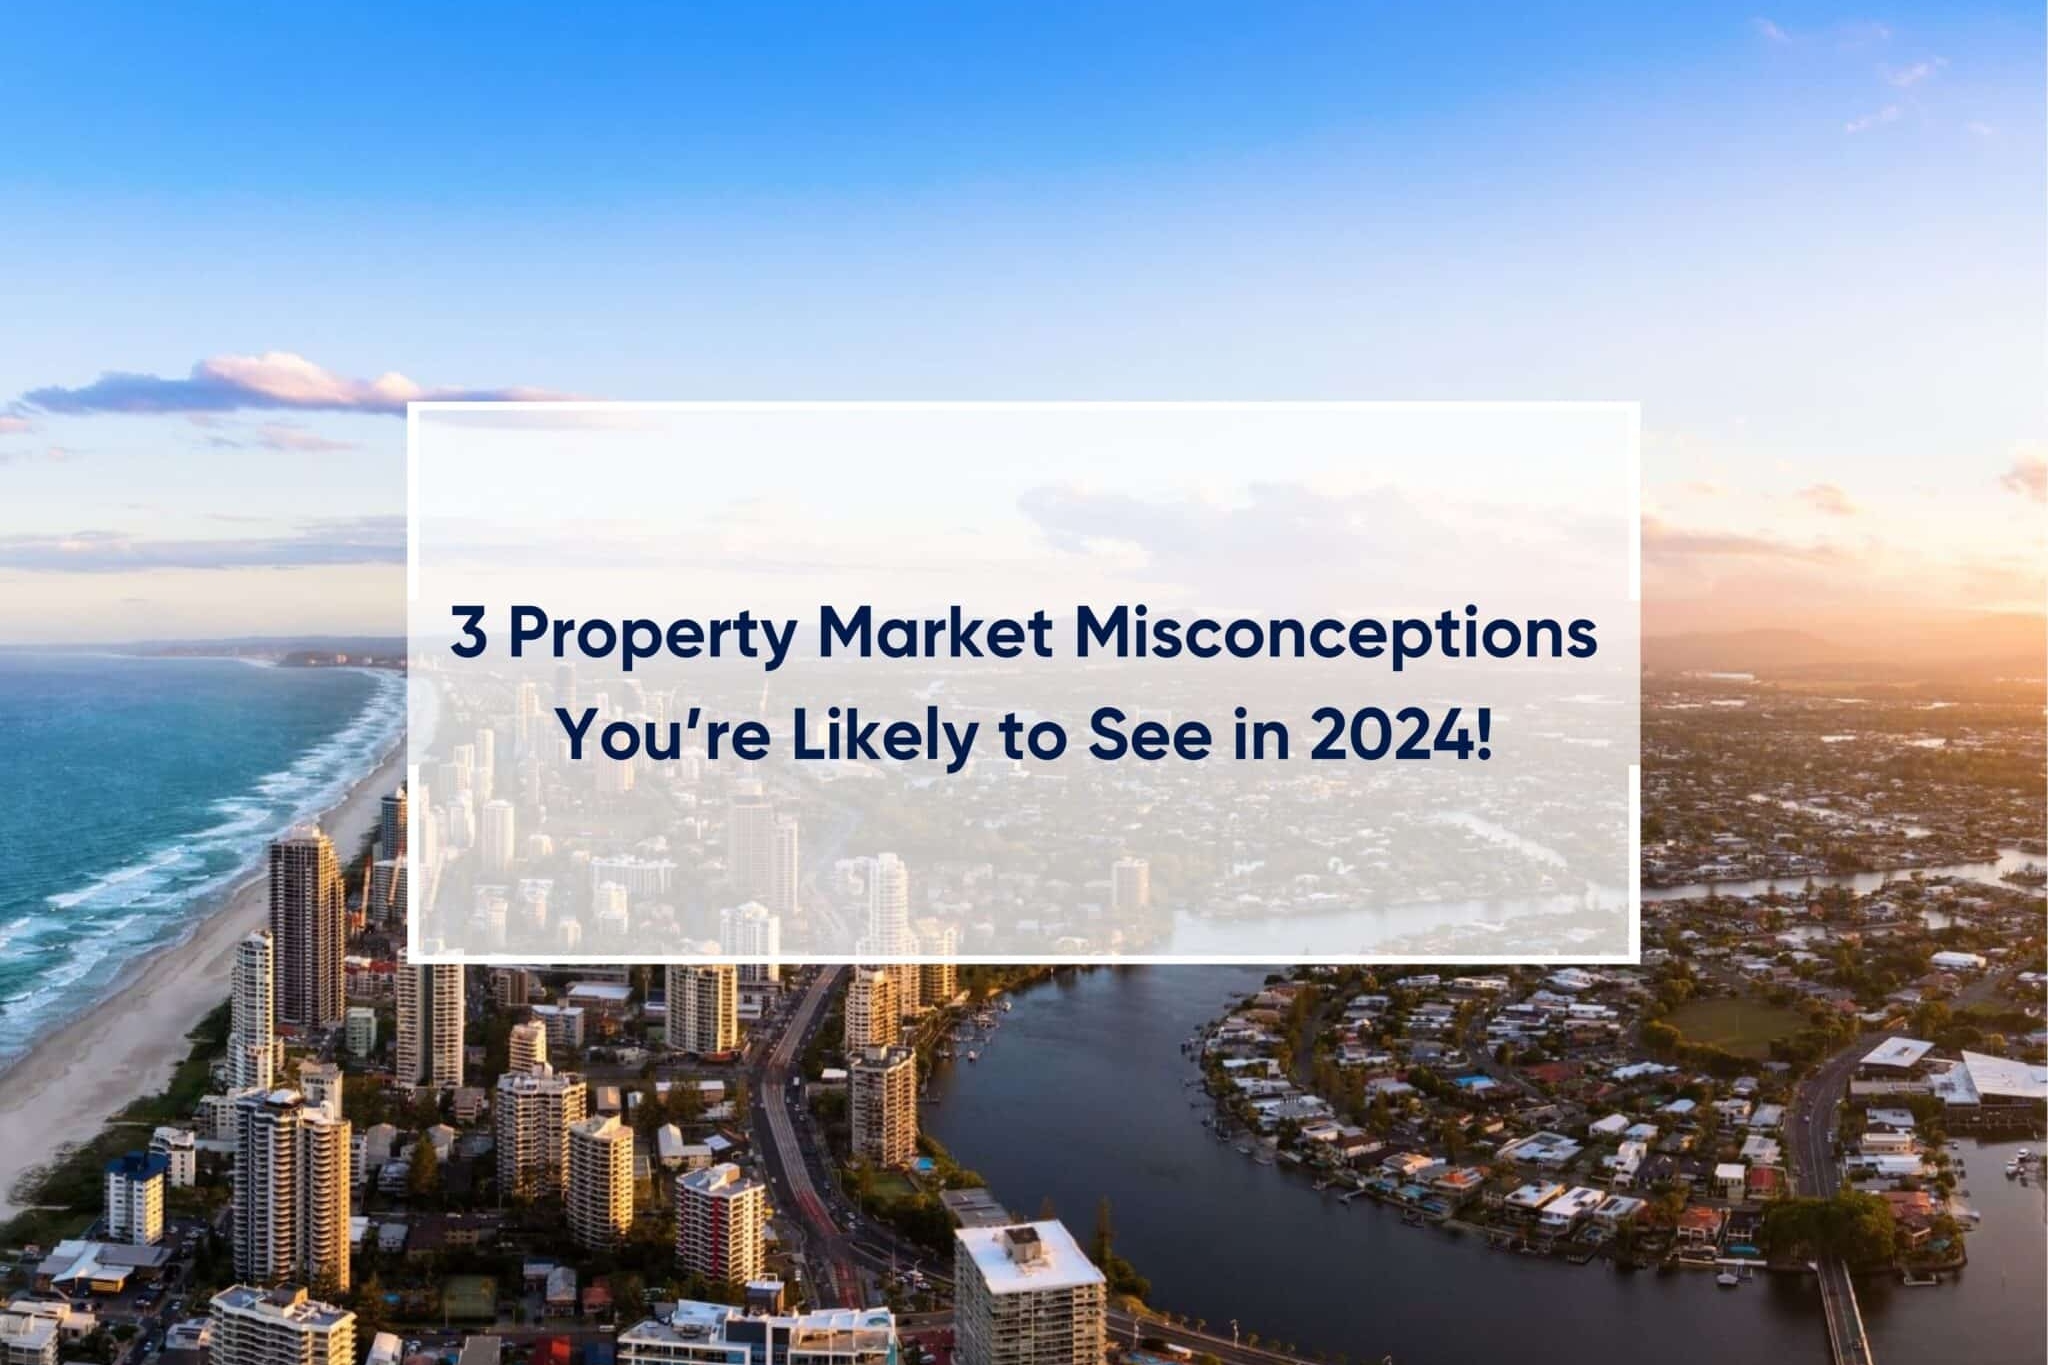 3 Property Market Misconceptions You're Likely to see in 2024!